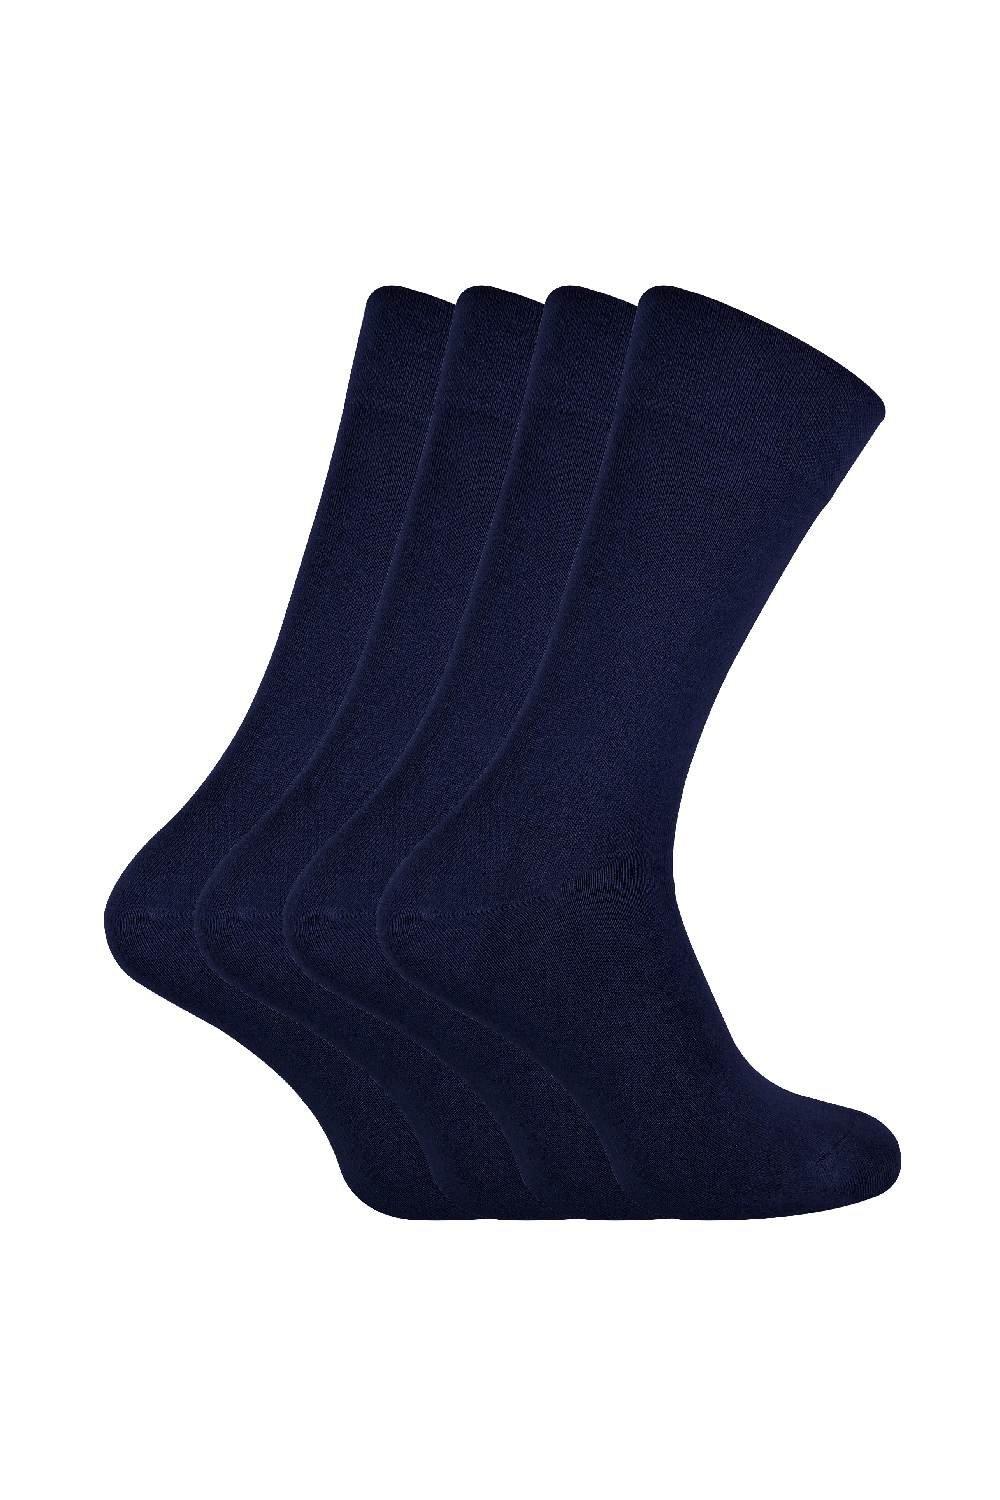 4 Pairs Bamboo Finely Knit Thin Super Soft Suit Socks